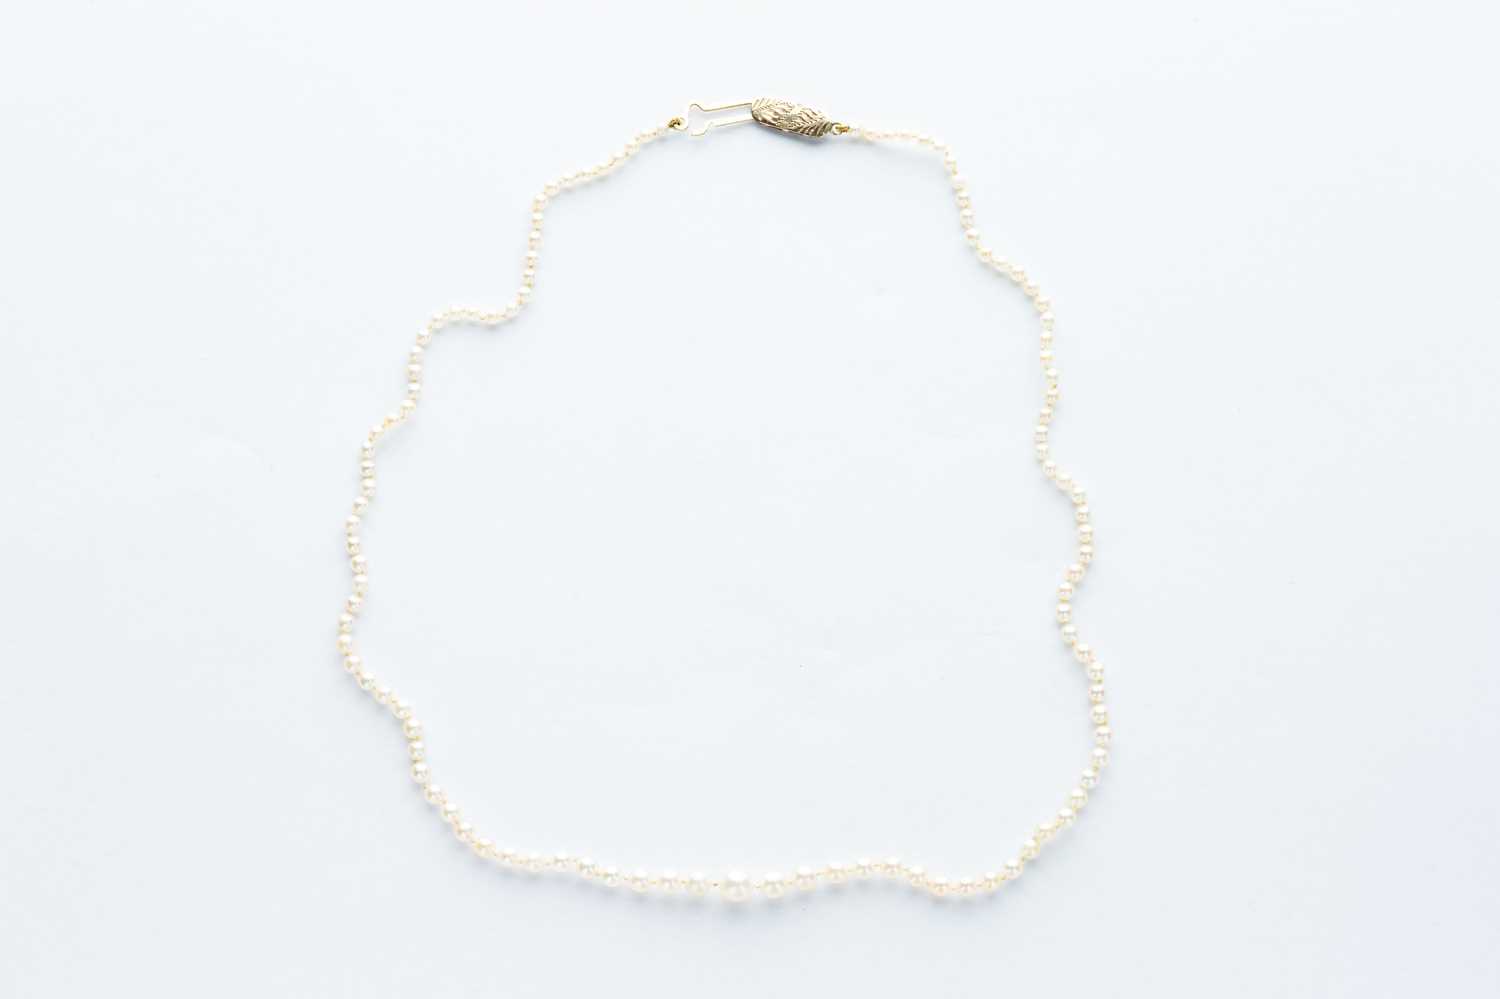 Lot 80 - A Single String Cultured Pearl Necklace